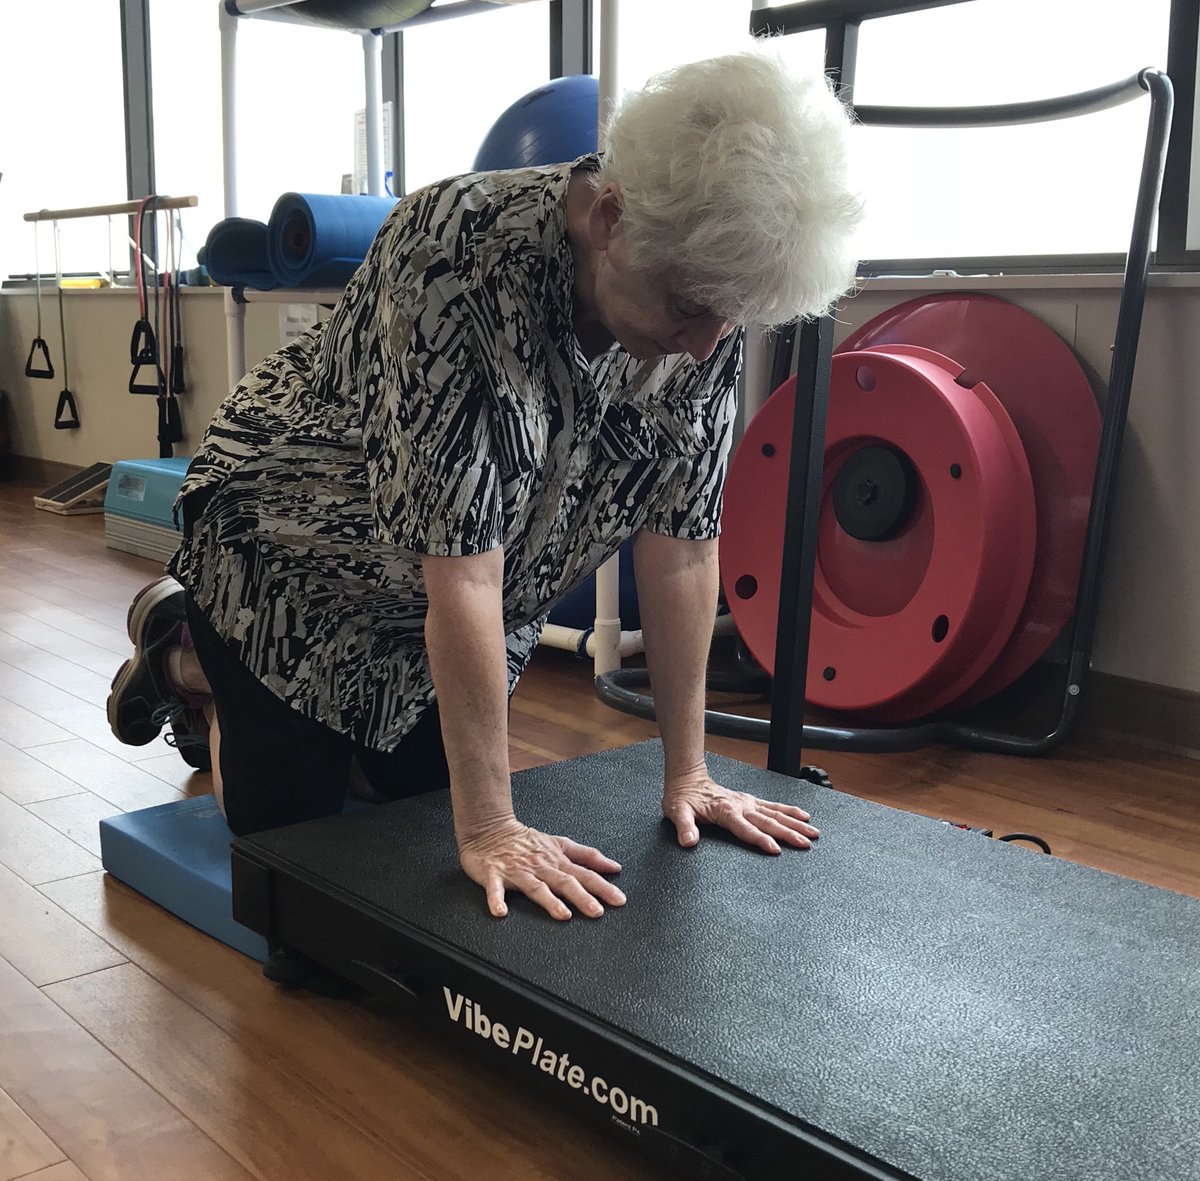 Osteoporosis Success Story!!
My client used The VibePlate 3 x’s a week, 10 min. a x, for 1 year.  Bone density in hip increased 8.6% and other areas maintained, which allows her to continue to stay off medication for the next year.